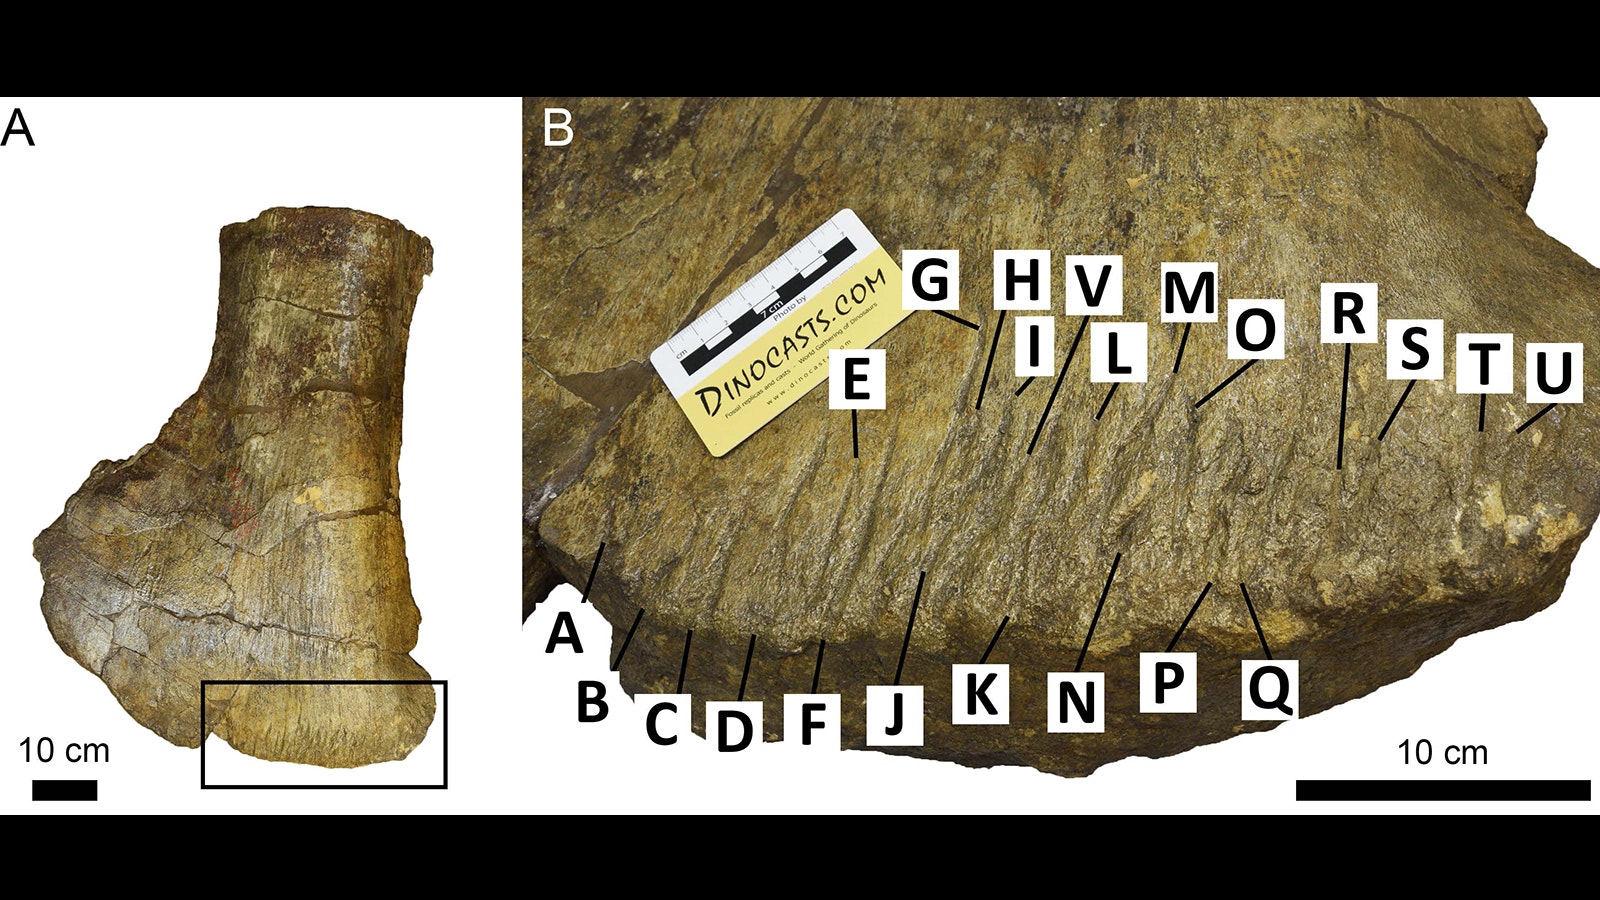 Scapula of Camarasaurus supremus showing bite traces (A) a saruopod scapula; and close up (B) that shows bite traces that follow the preferred orientation along the distal margin of the bone.